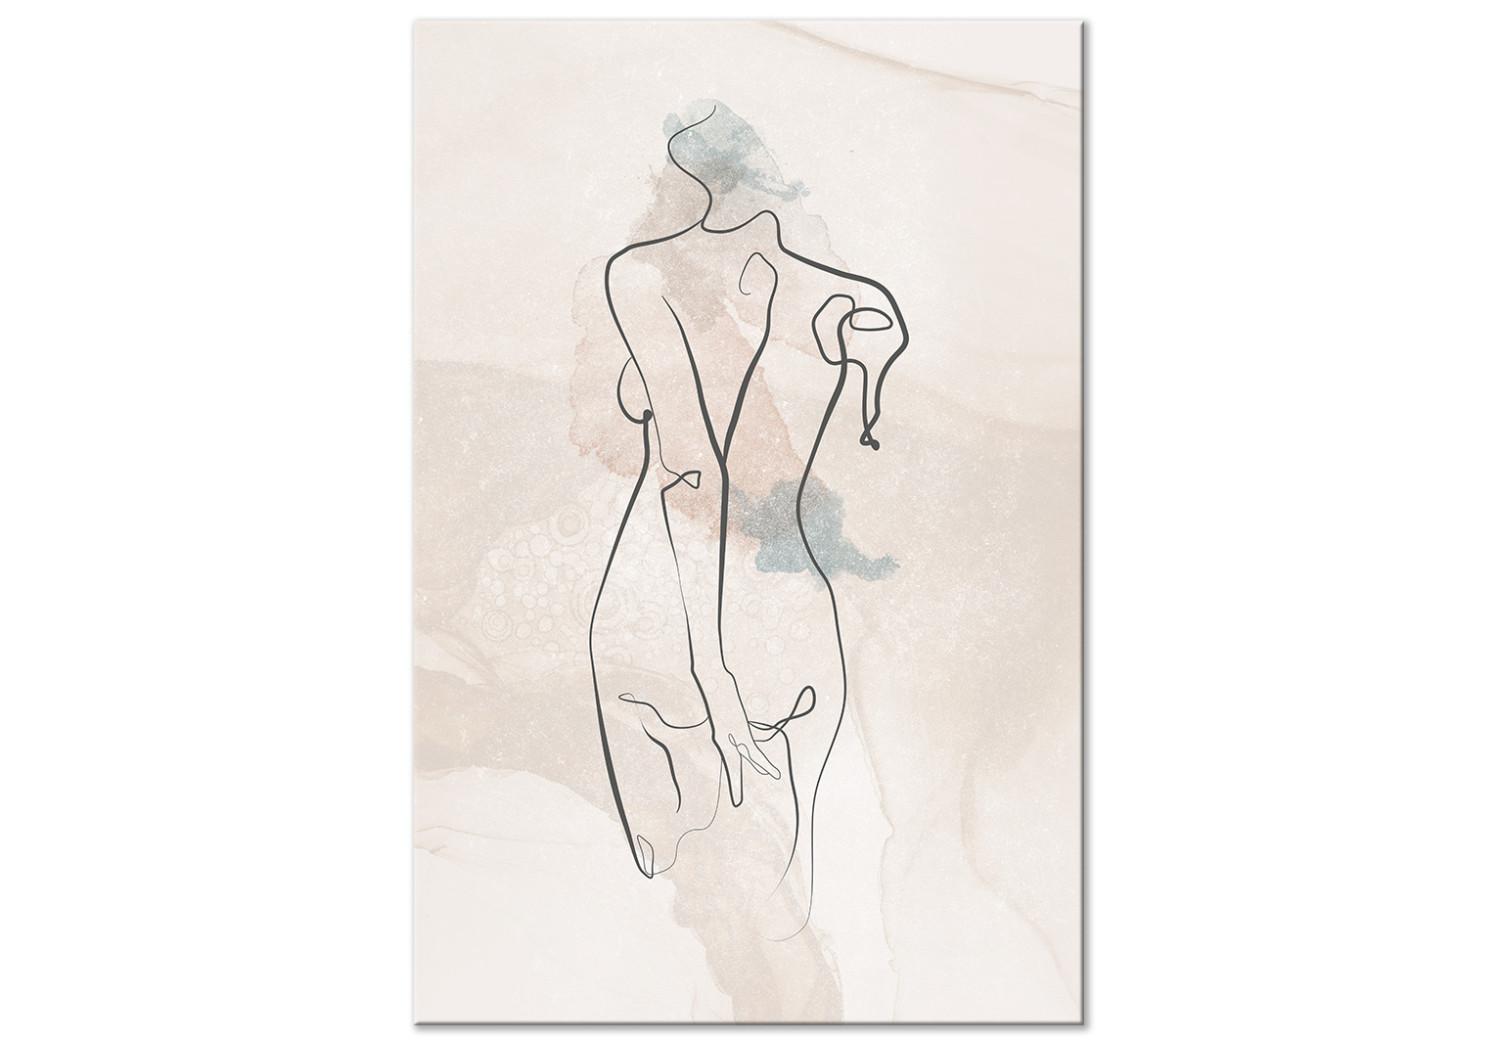 Cuadro decorativo Standing in the Sun - Linear Abstract Act of a Female Figure